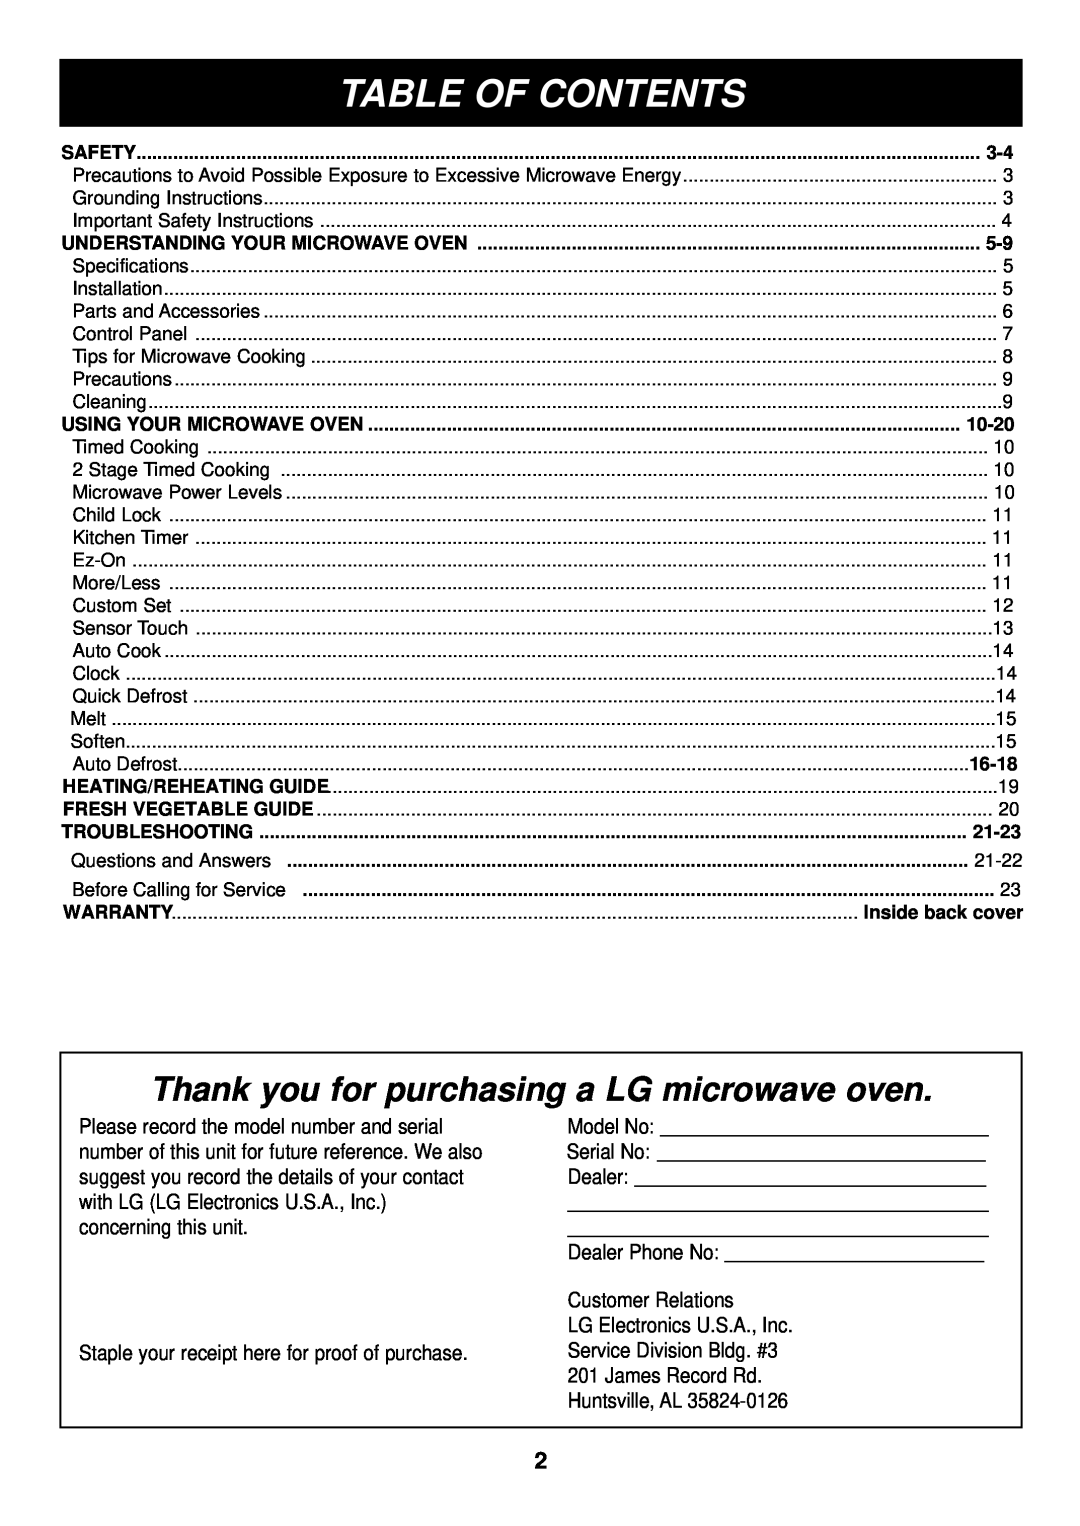 LG Electronics LPRM1270ST manual Table Of Contents, Thank you for purchasing a LG microwave oven 